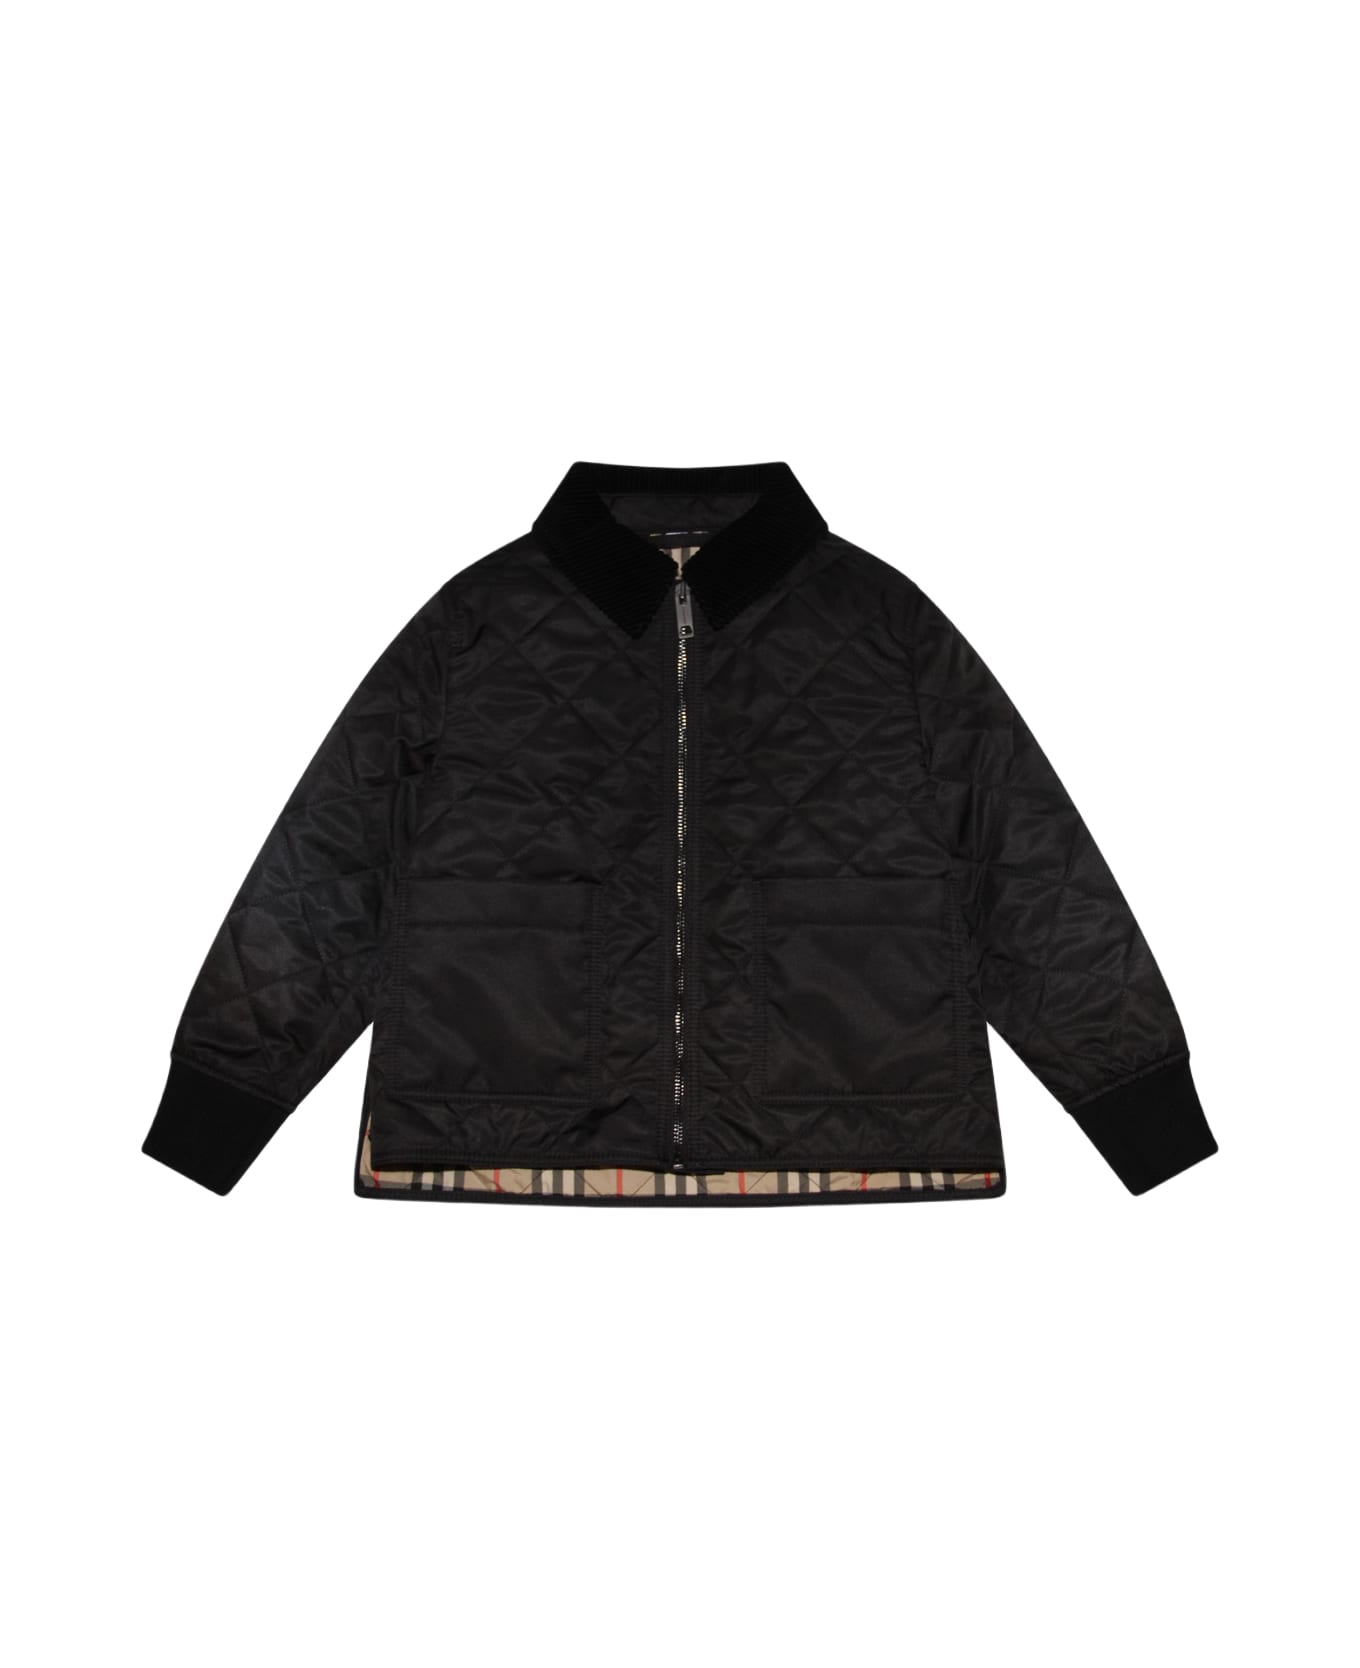 Burberry Black And Archive Beige Casual Jacket - Black